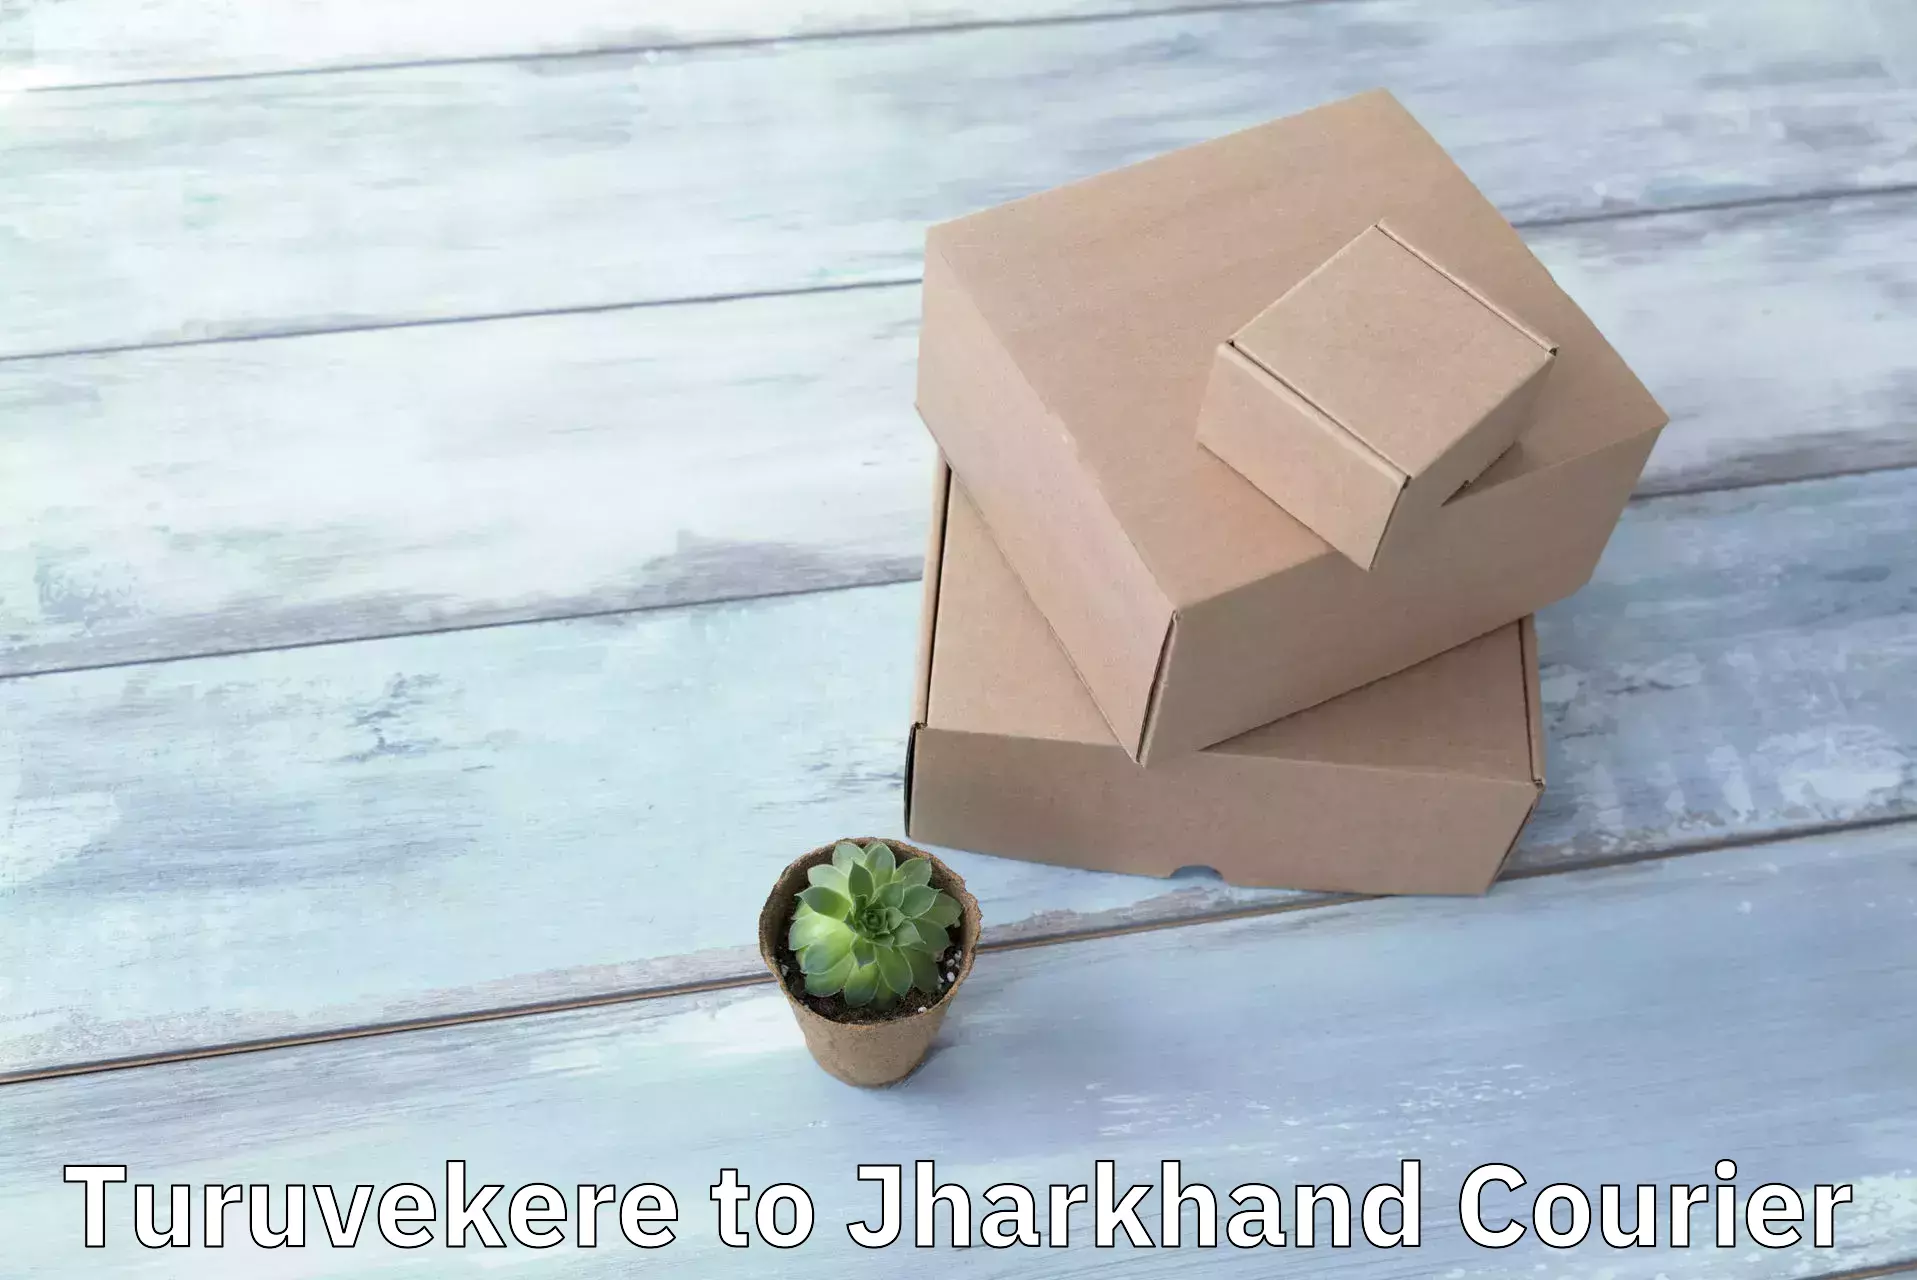 Efficient cargo handling Turuvekere to Jharkhand